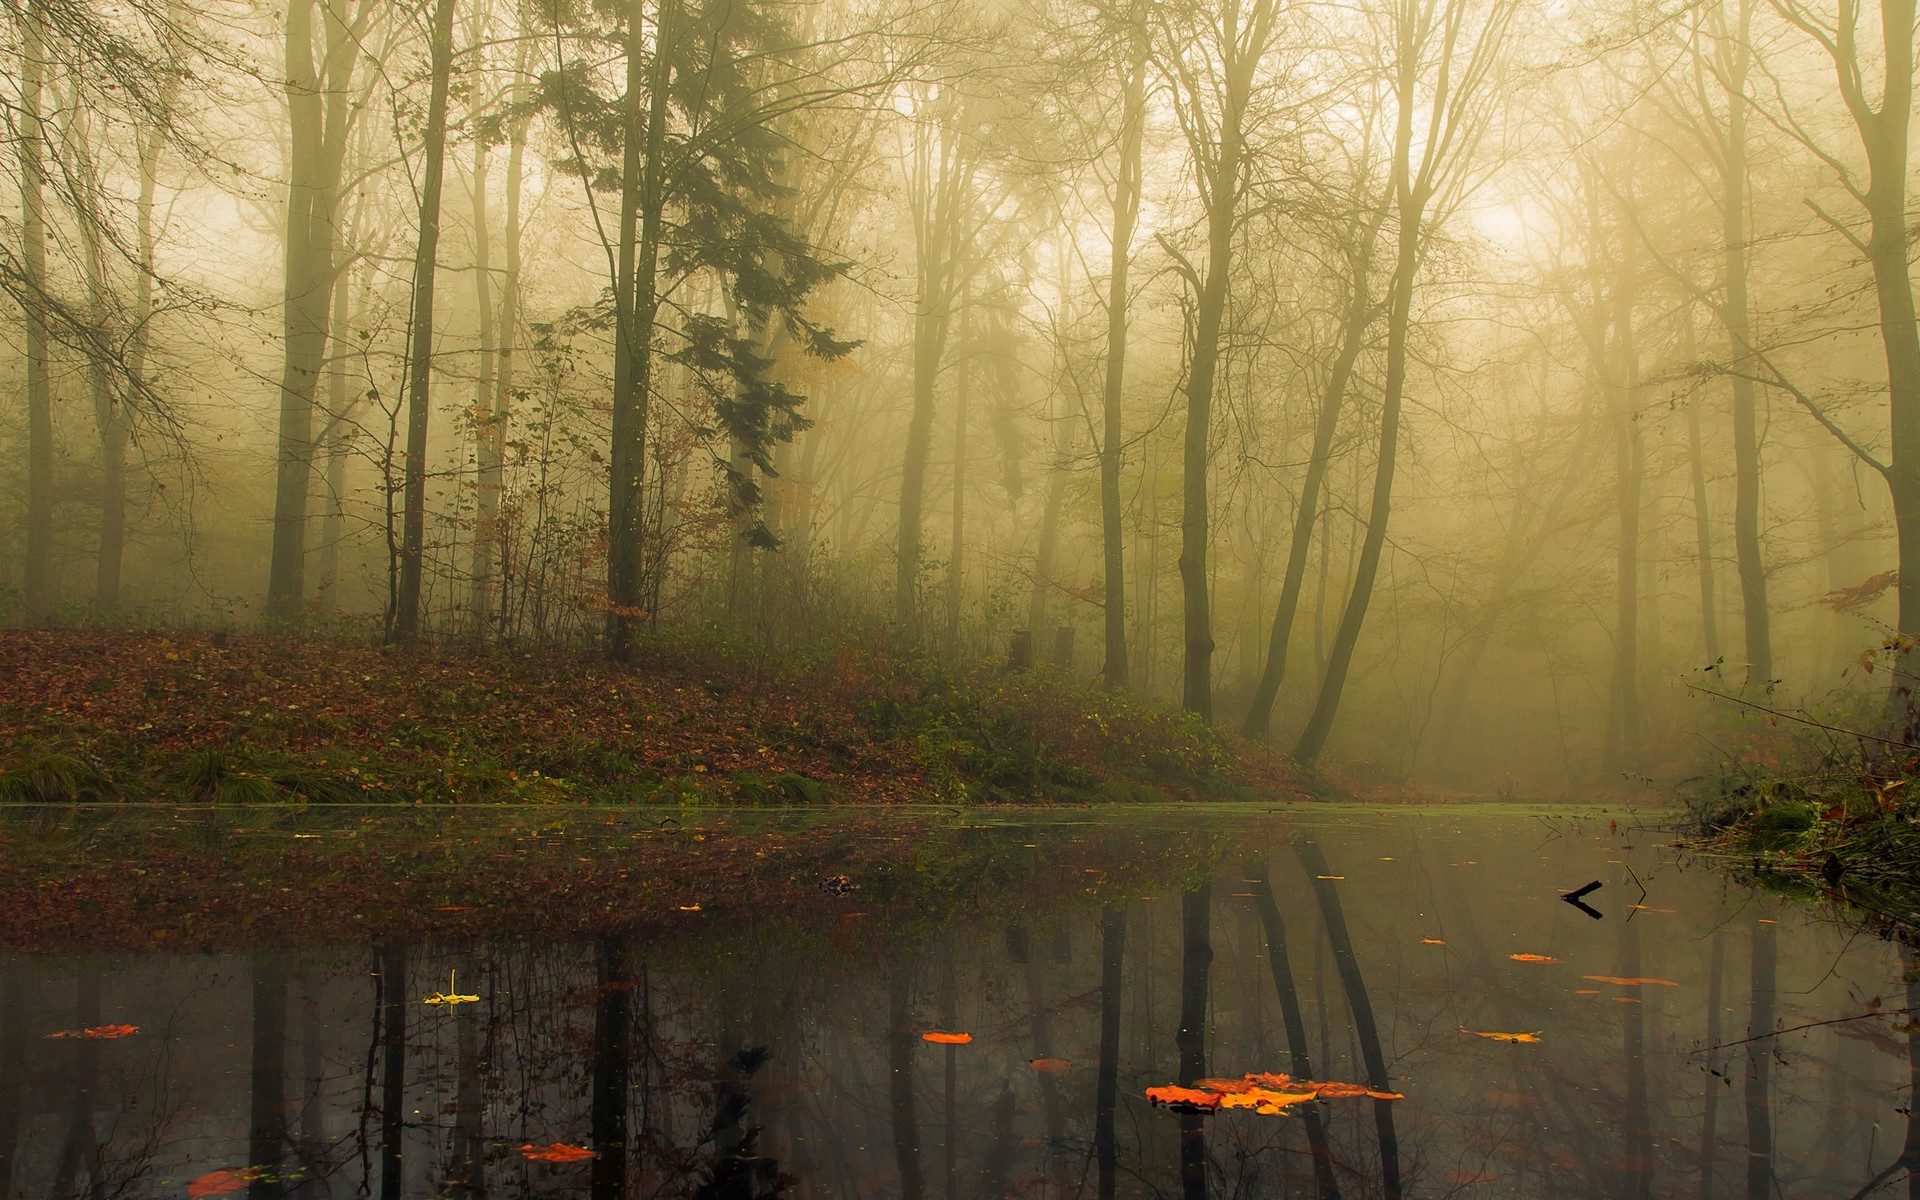 nature, Landscape, Mist, Forest, Morning, Trees, Leaves, Fall, Water, Reflection, Calm Wallpaper